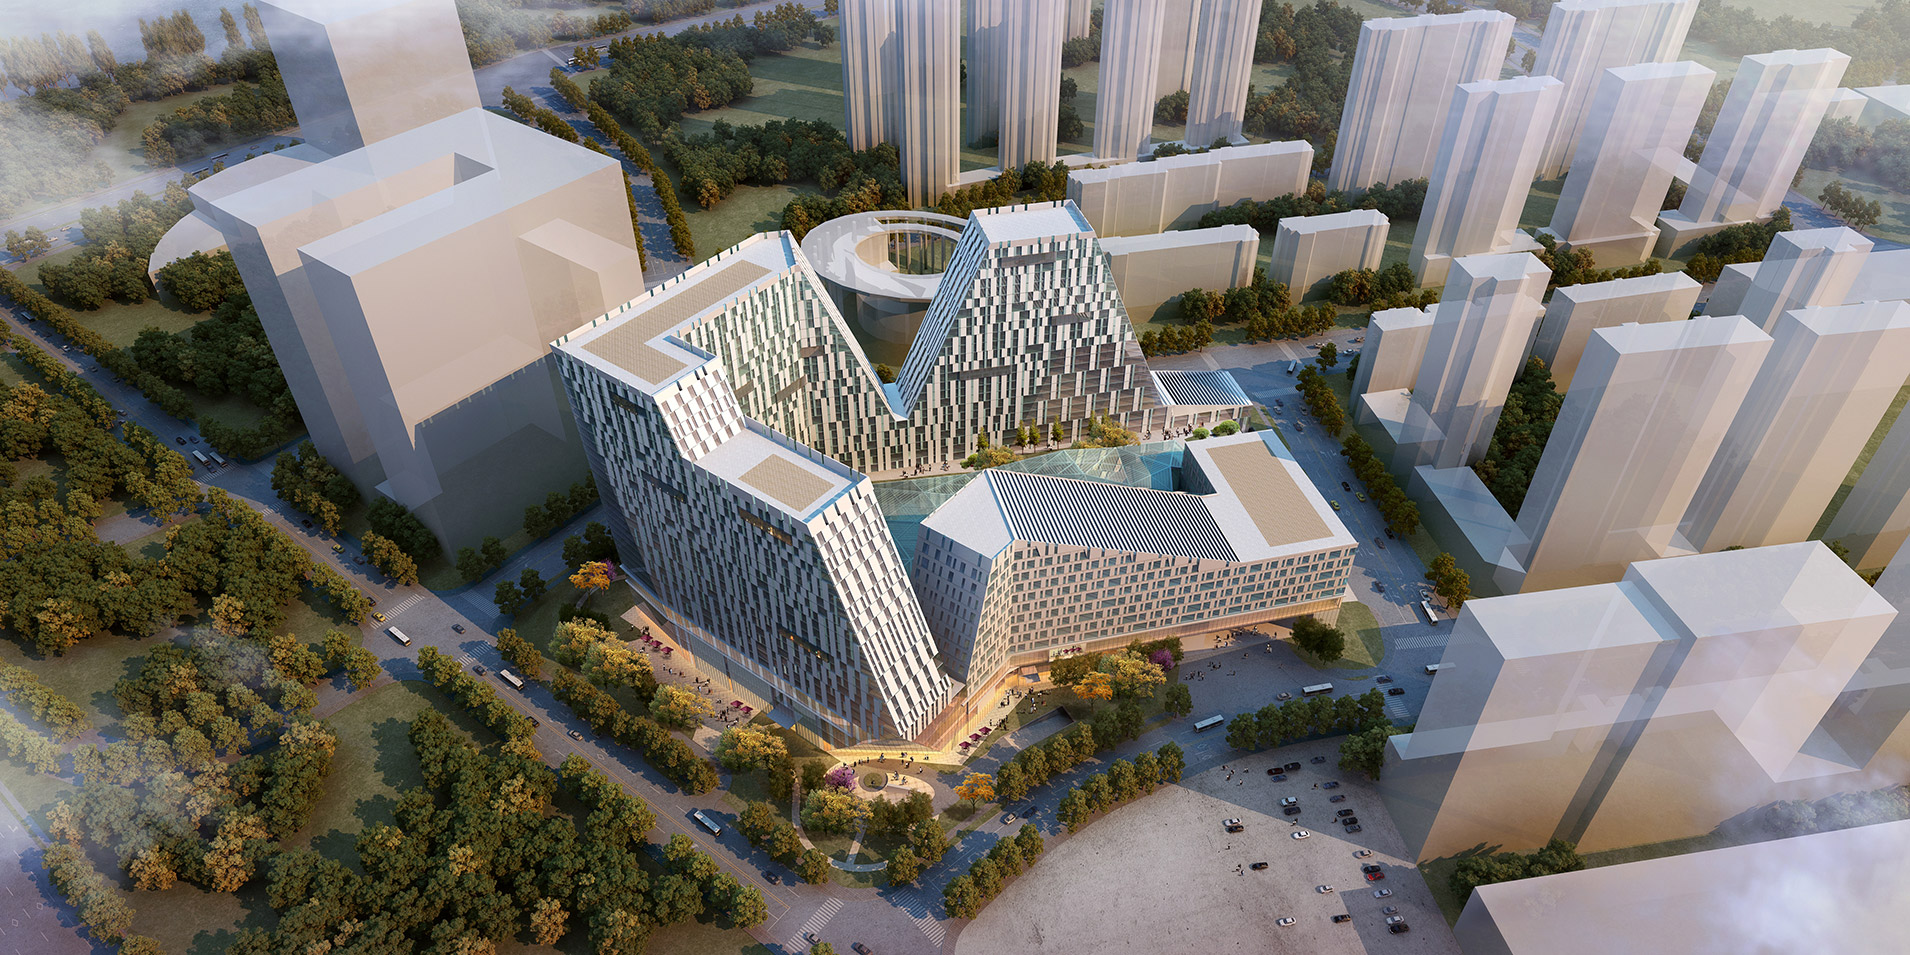 5+design looks to mountains for Chinese transport hub design